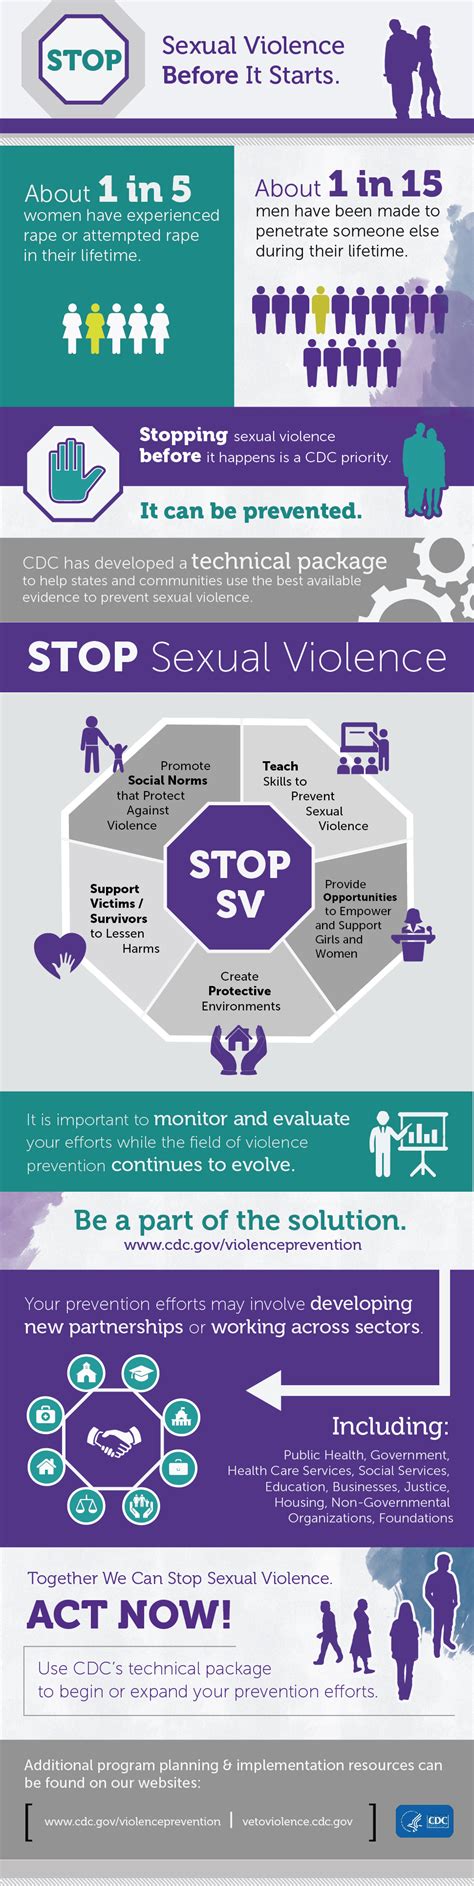 infographic about sexual violence prevention violence prevention